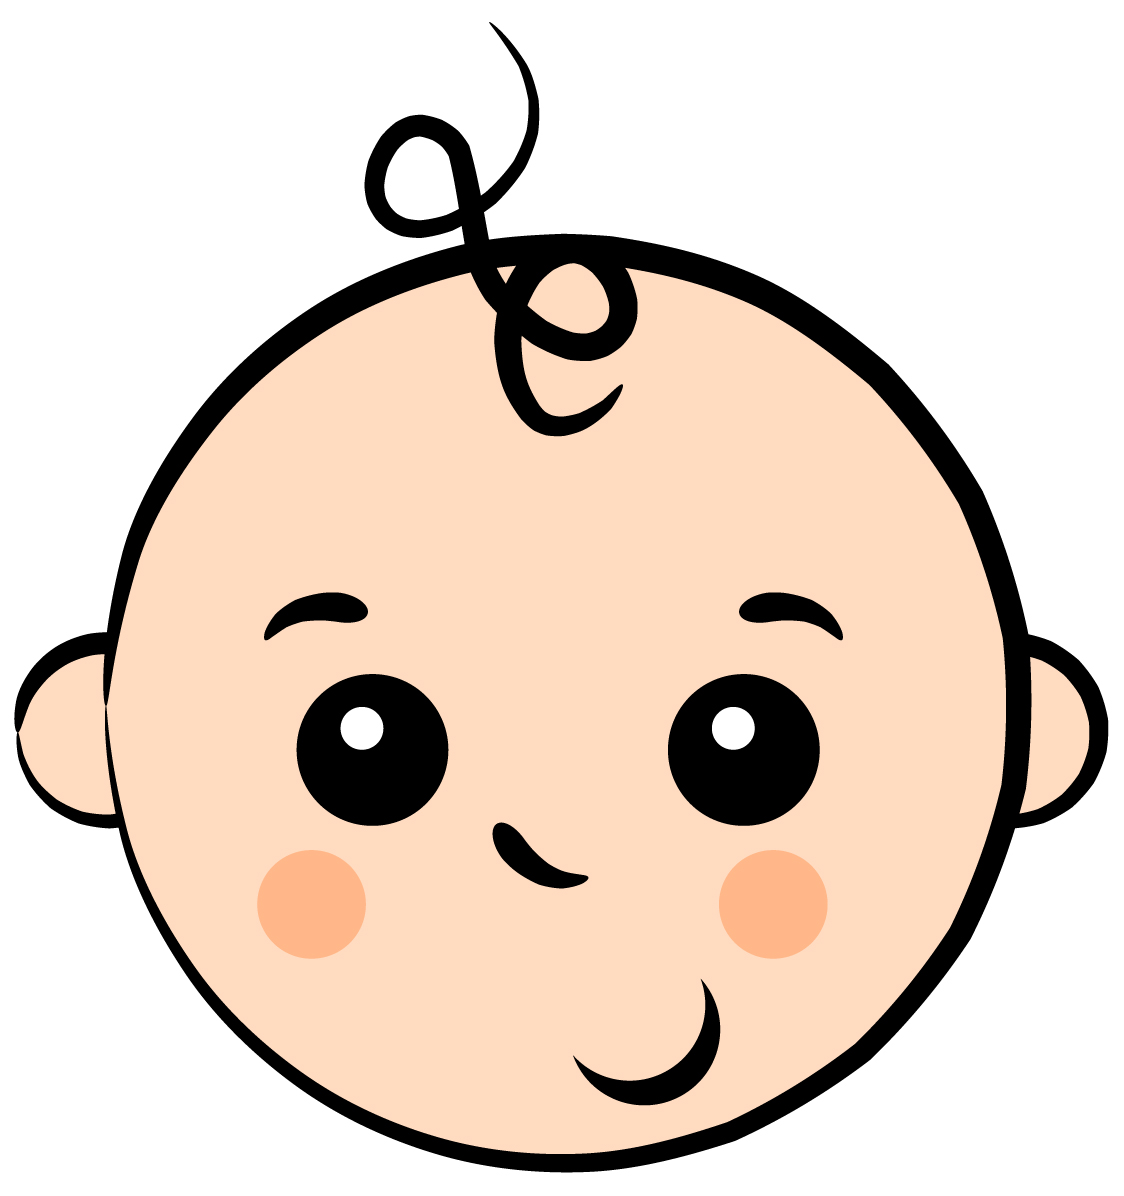 Butterfly baby face clipart